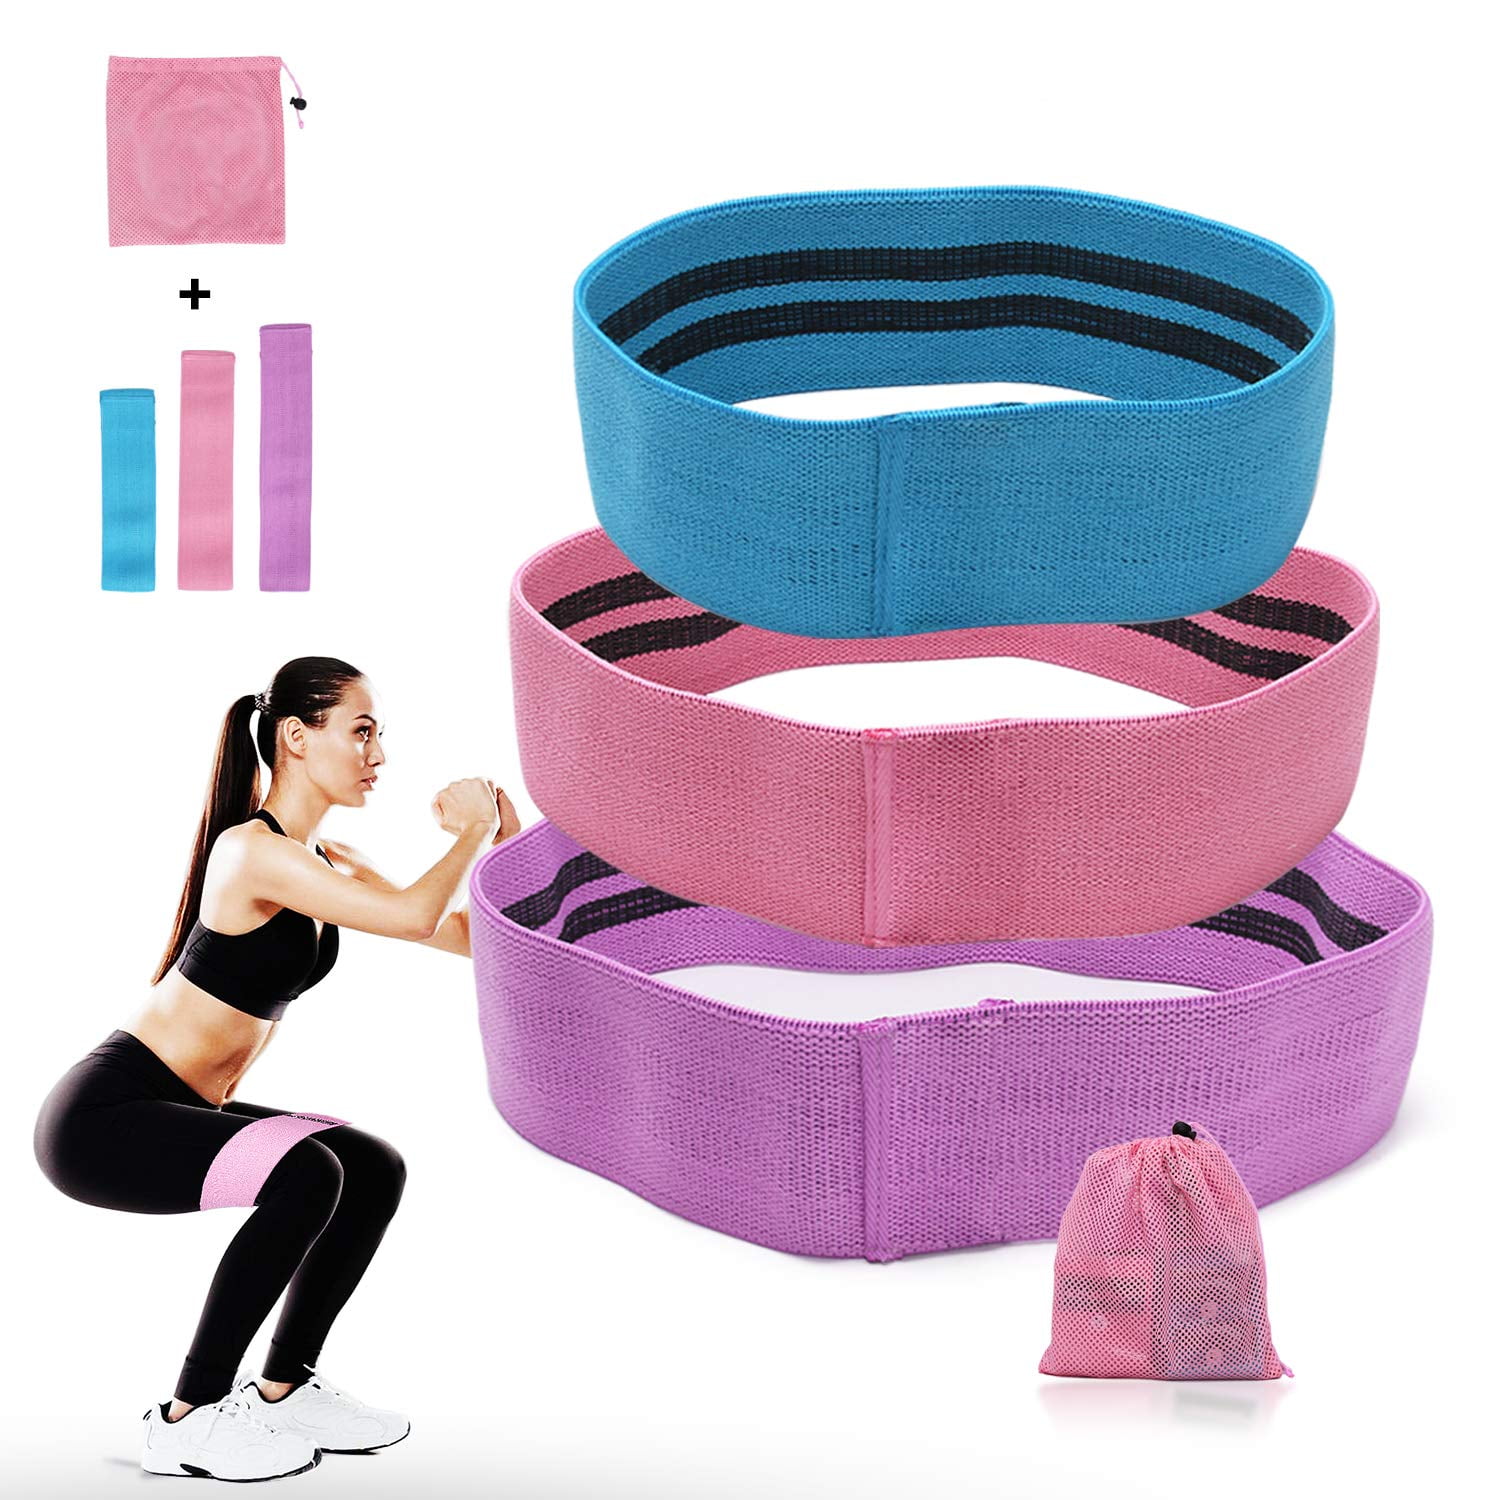 Details about   3X Fabric Resistance Bands Legs and Booty Band Exercise Fitness Workout Hip Loop 